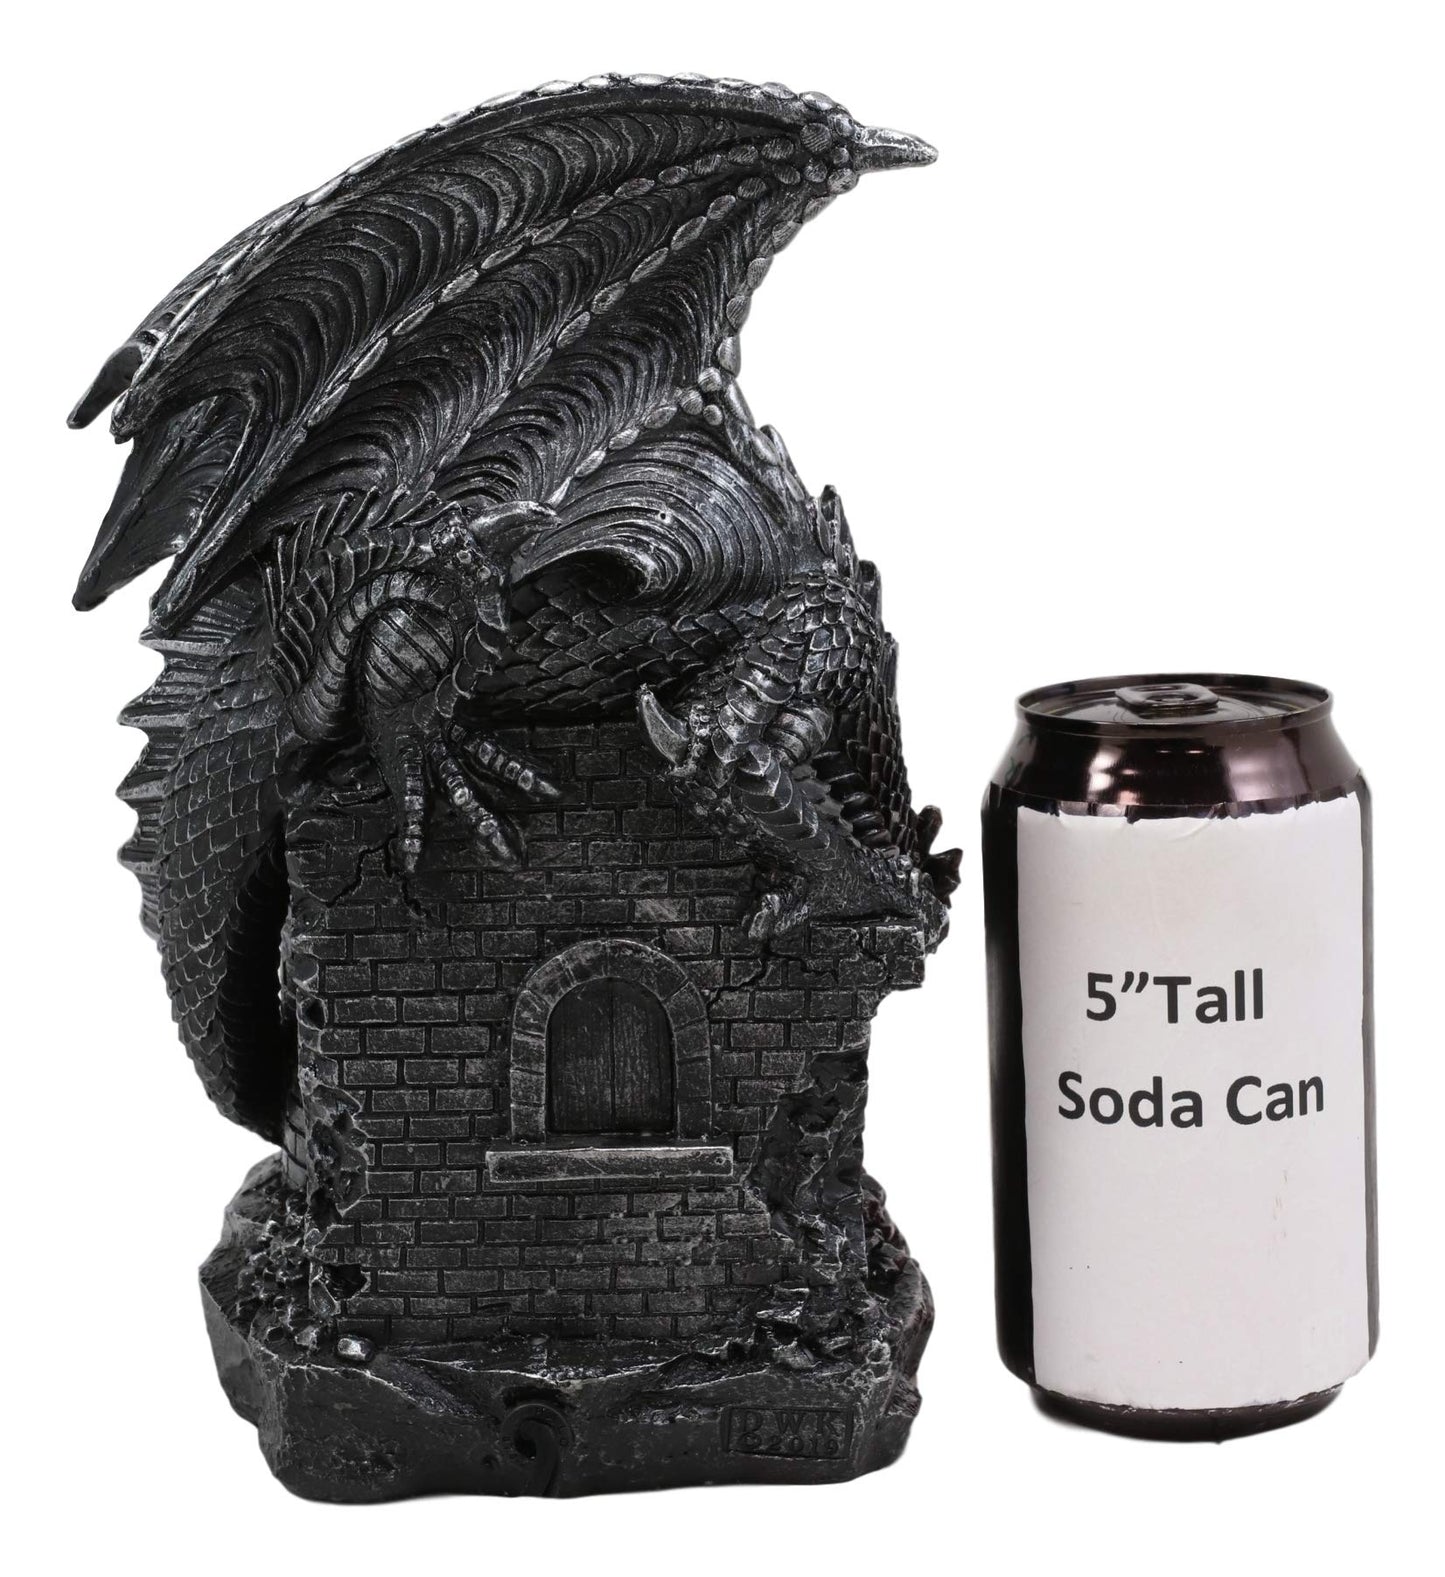 Ebros Smaug Castle Guardian Dragon Electric Oil Diffuser Burner Tart Warmer Aroma Scent Statue 9.5" Tall Figurine Dungeons and Dragons Decorative Decor for Aromatherapy Accessory Halloween Prop